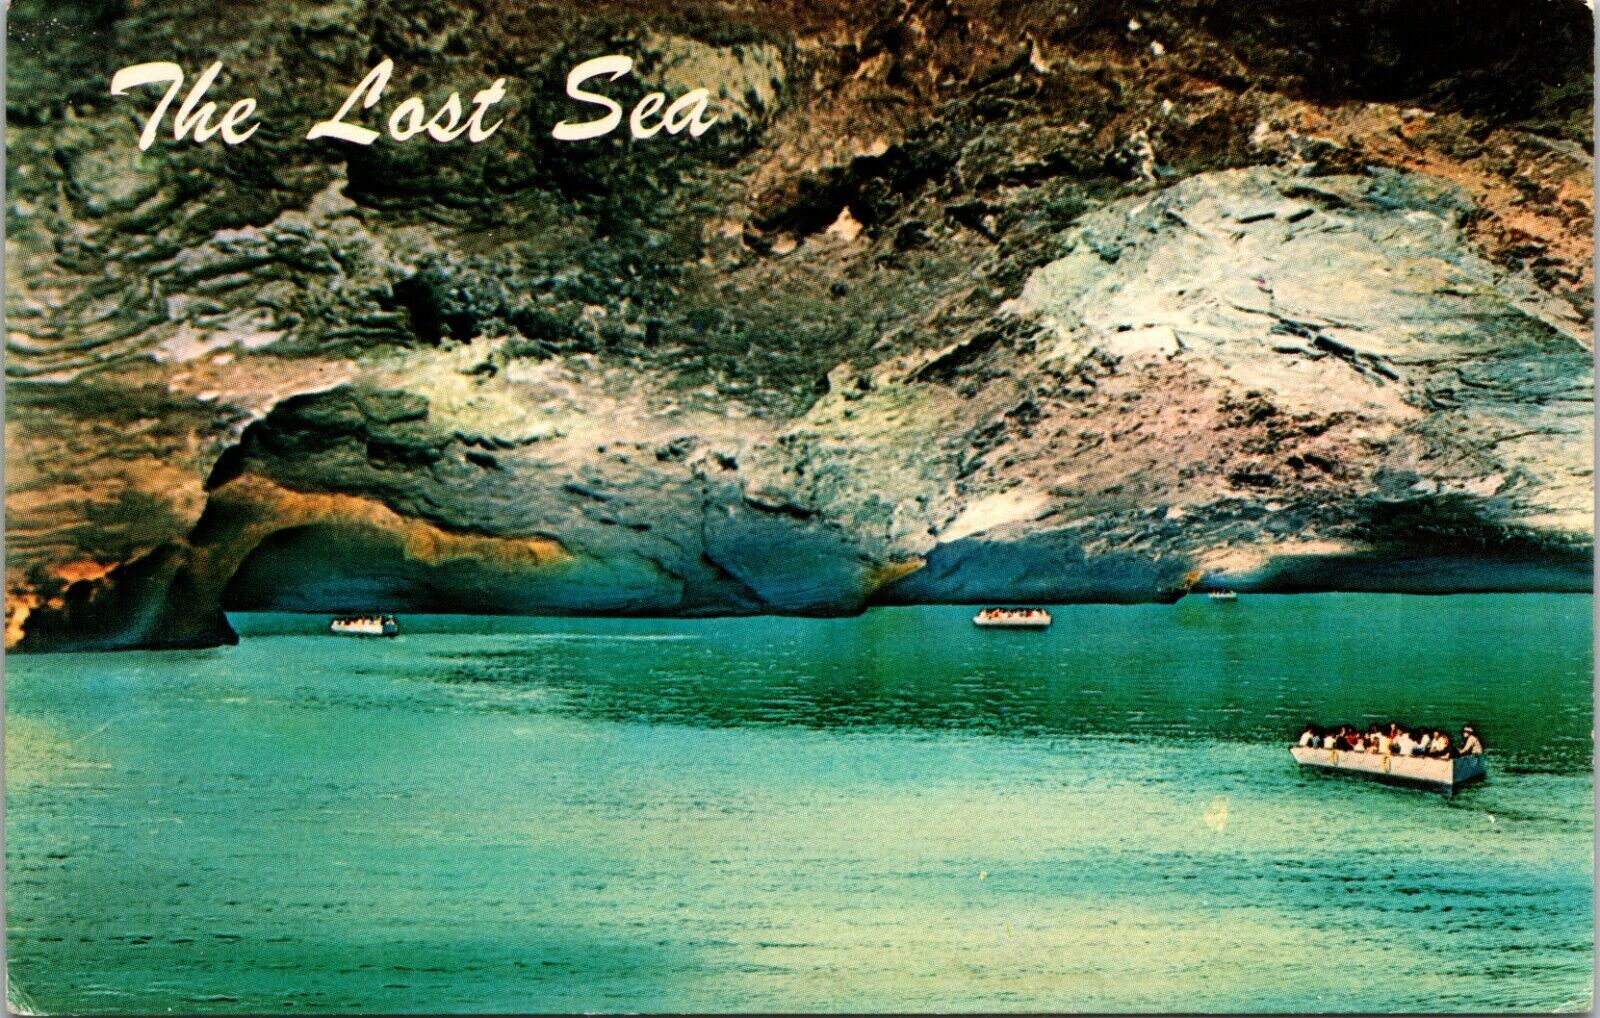 The Lost Sea Worlds Largest Underground Lake Tennessee TN Boats Vtg Postcard